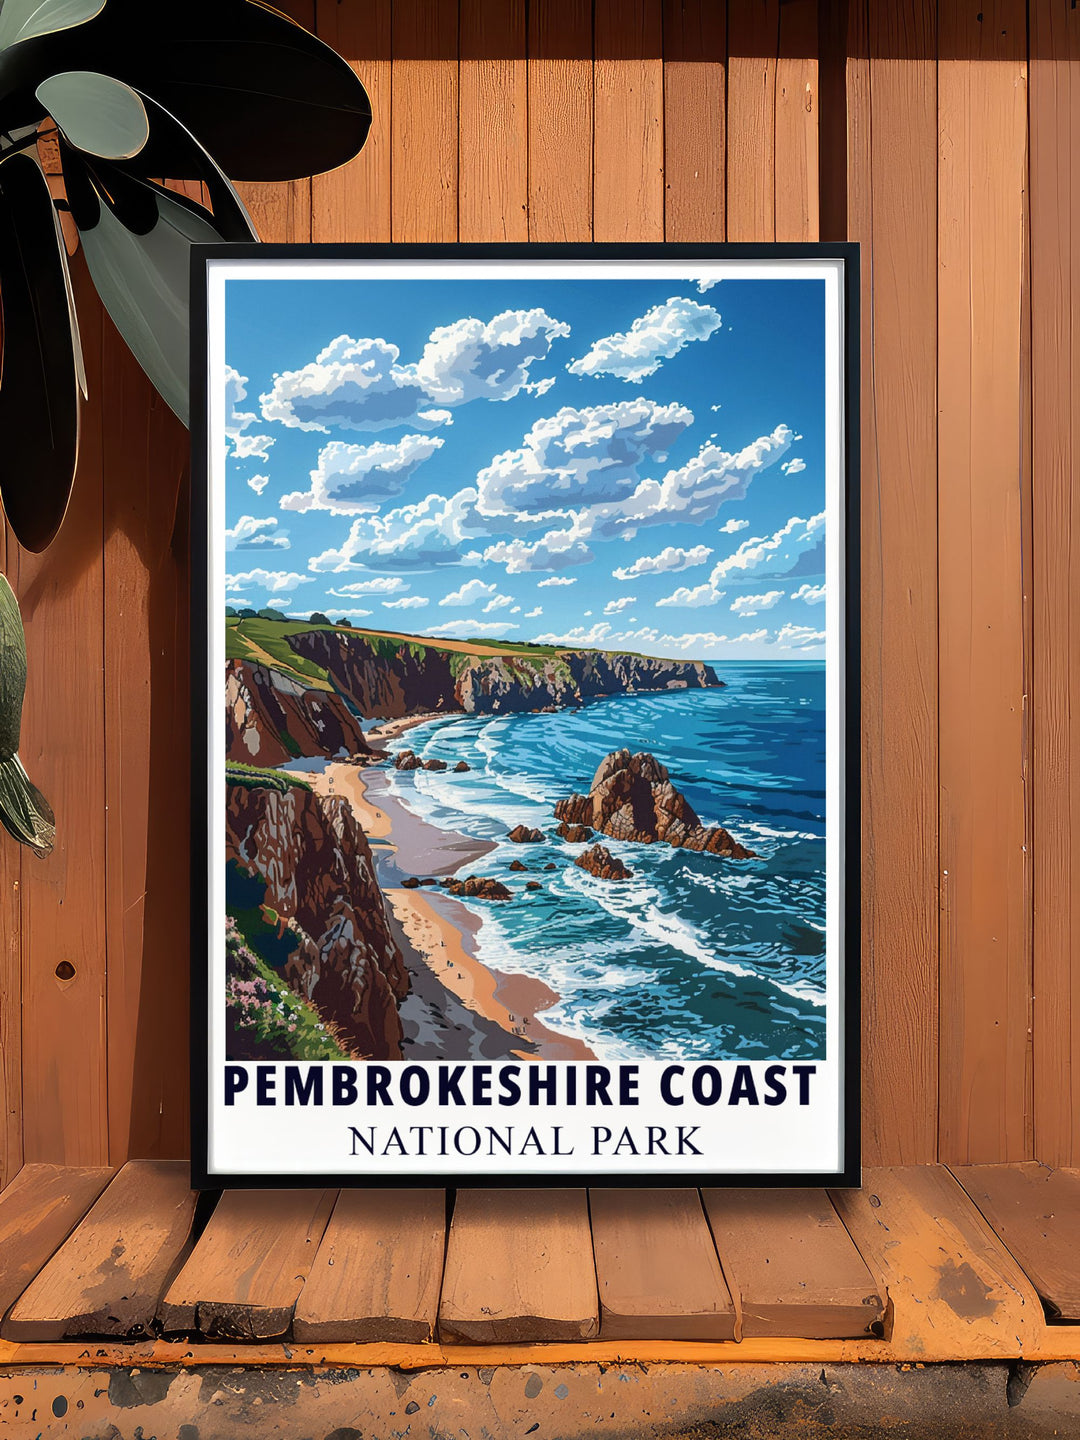 Experience the stunning coastline of Pembrokeshire Wales with this retro travel poster featuring rich colors and classic Art Deco design capturing the serene yet powerful essence of the Welsh landscape suitable for framed print collections.